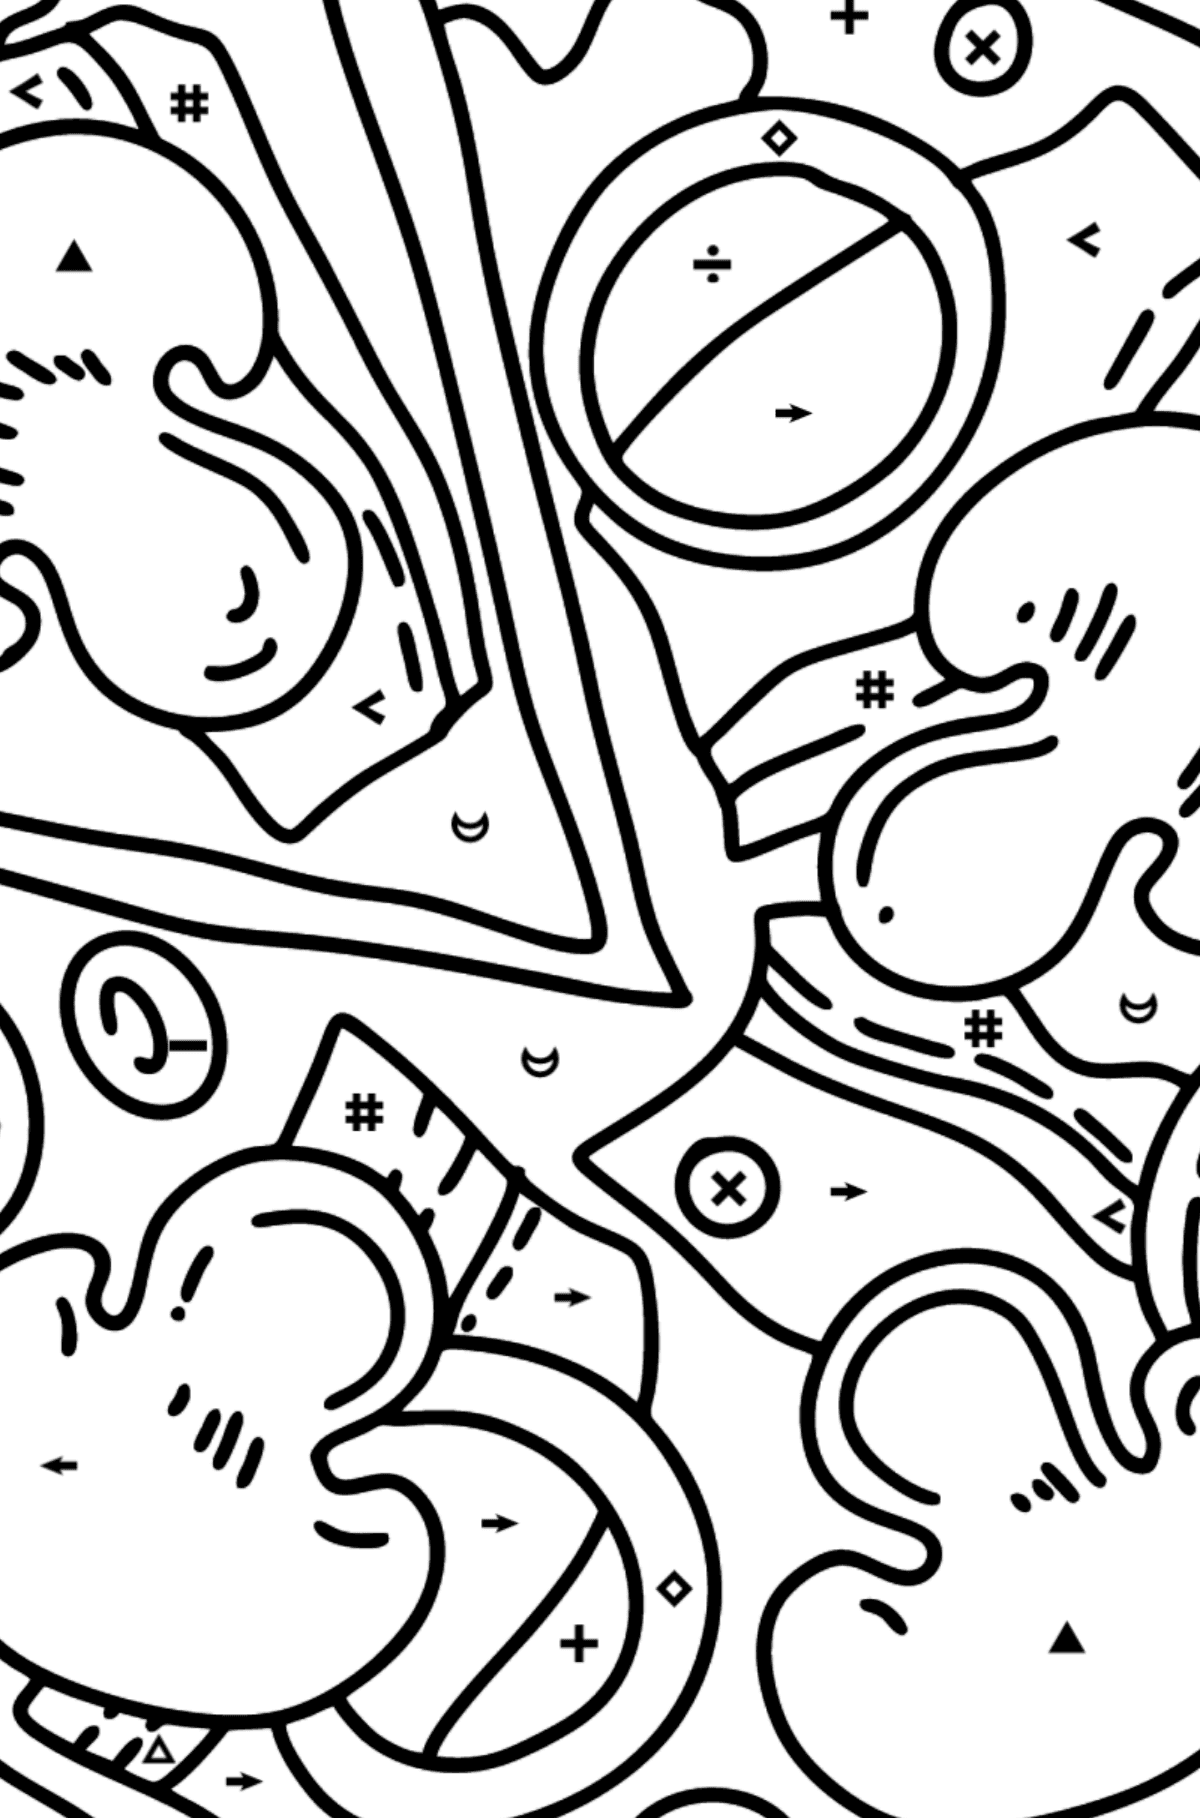 Pizza with Mushrooms coloring page - Coloring by Symbols for Kids